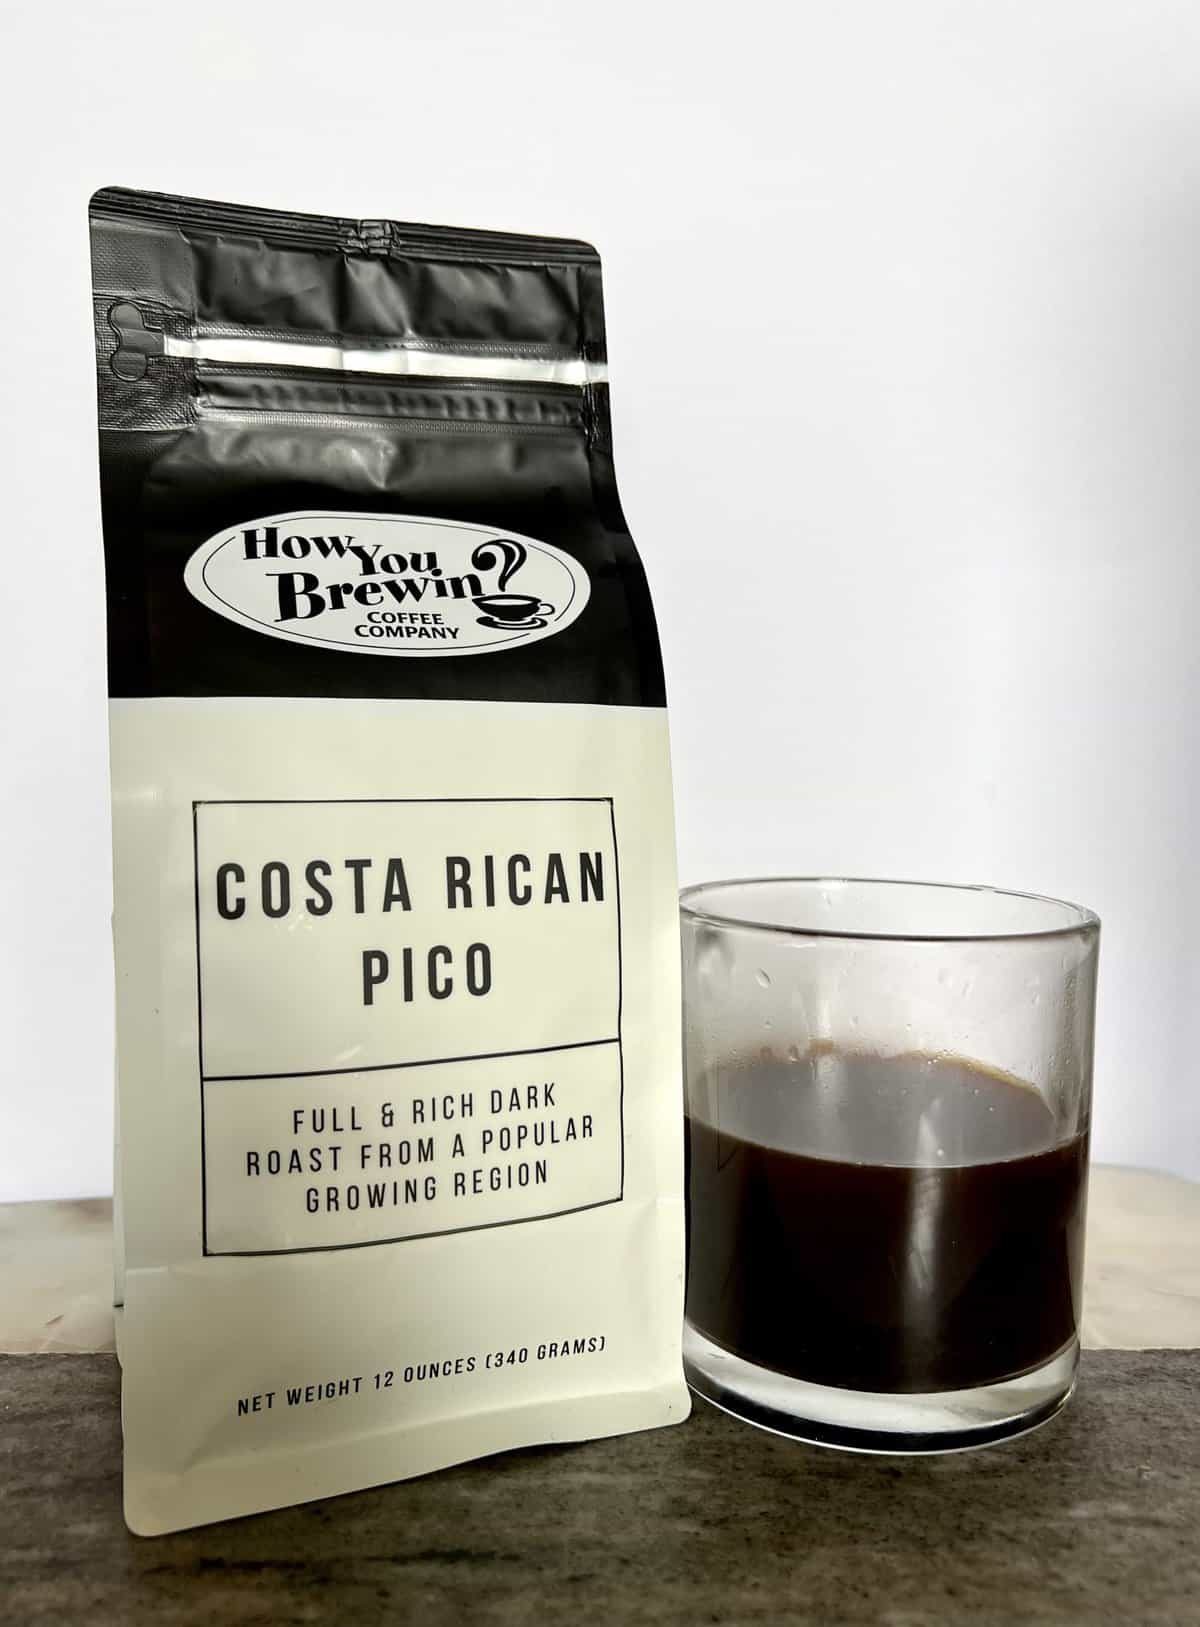 a-pack-of-Costa-Rican-Pico-coffee-stands-next-to-a-brewed-cup-of-coffee-scaled